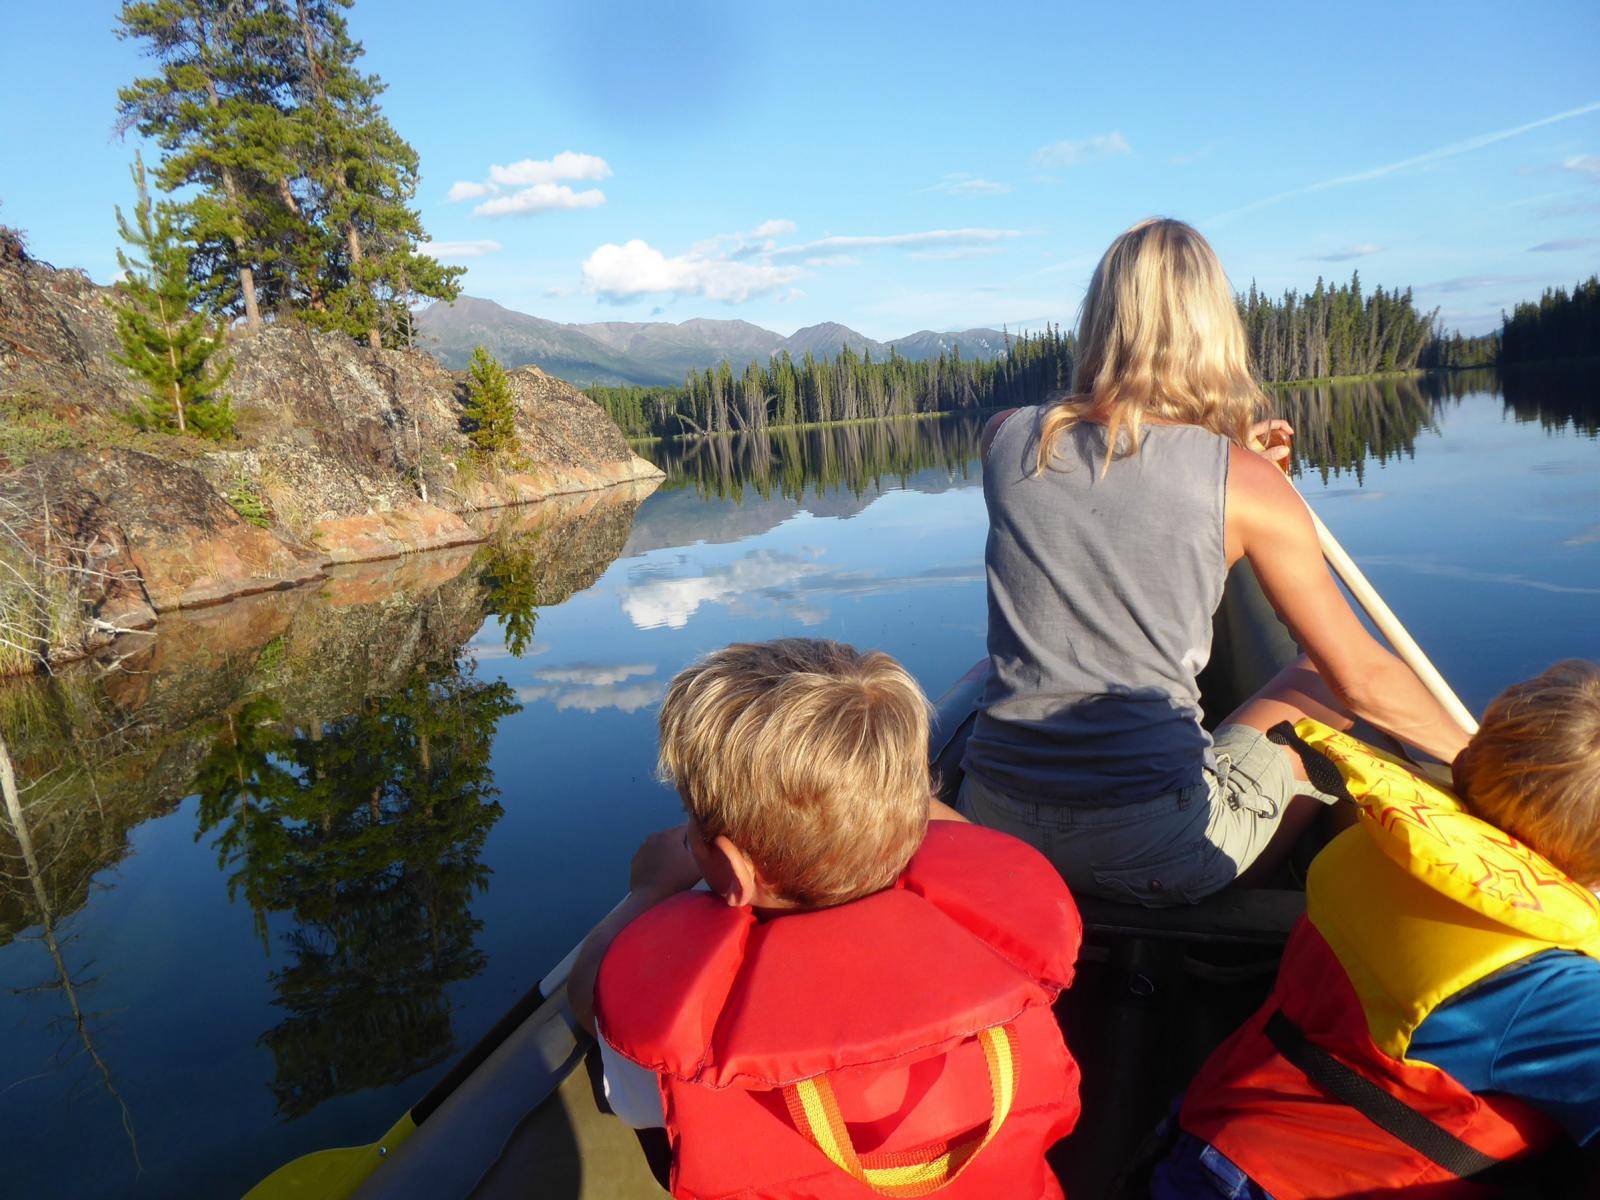 View from inside a kayak with a woman and two children paddling over a calm lake towards some trees with mountains in the background